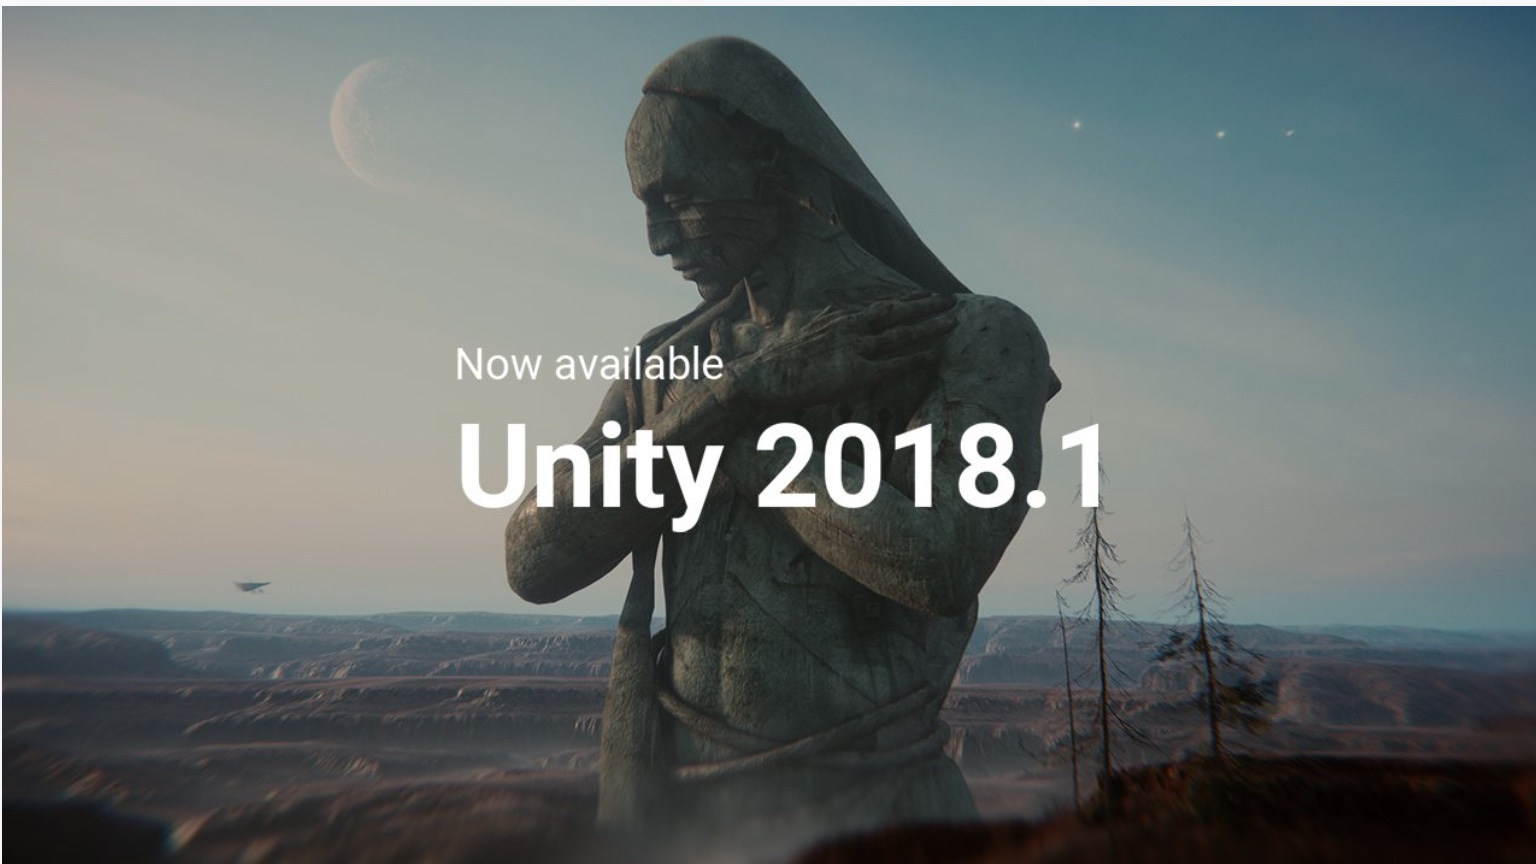 Unity 2018.1 now available with over 330 new features, improvements